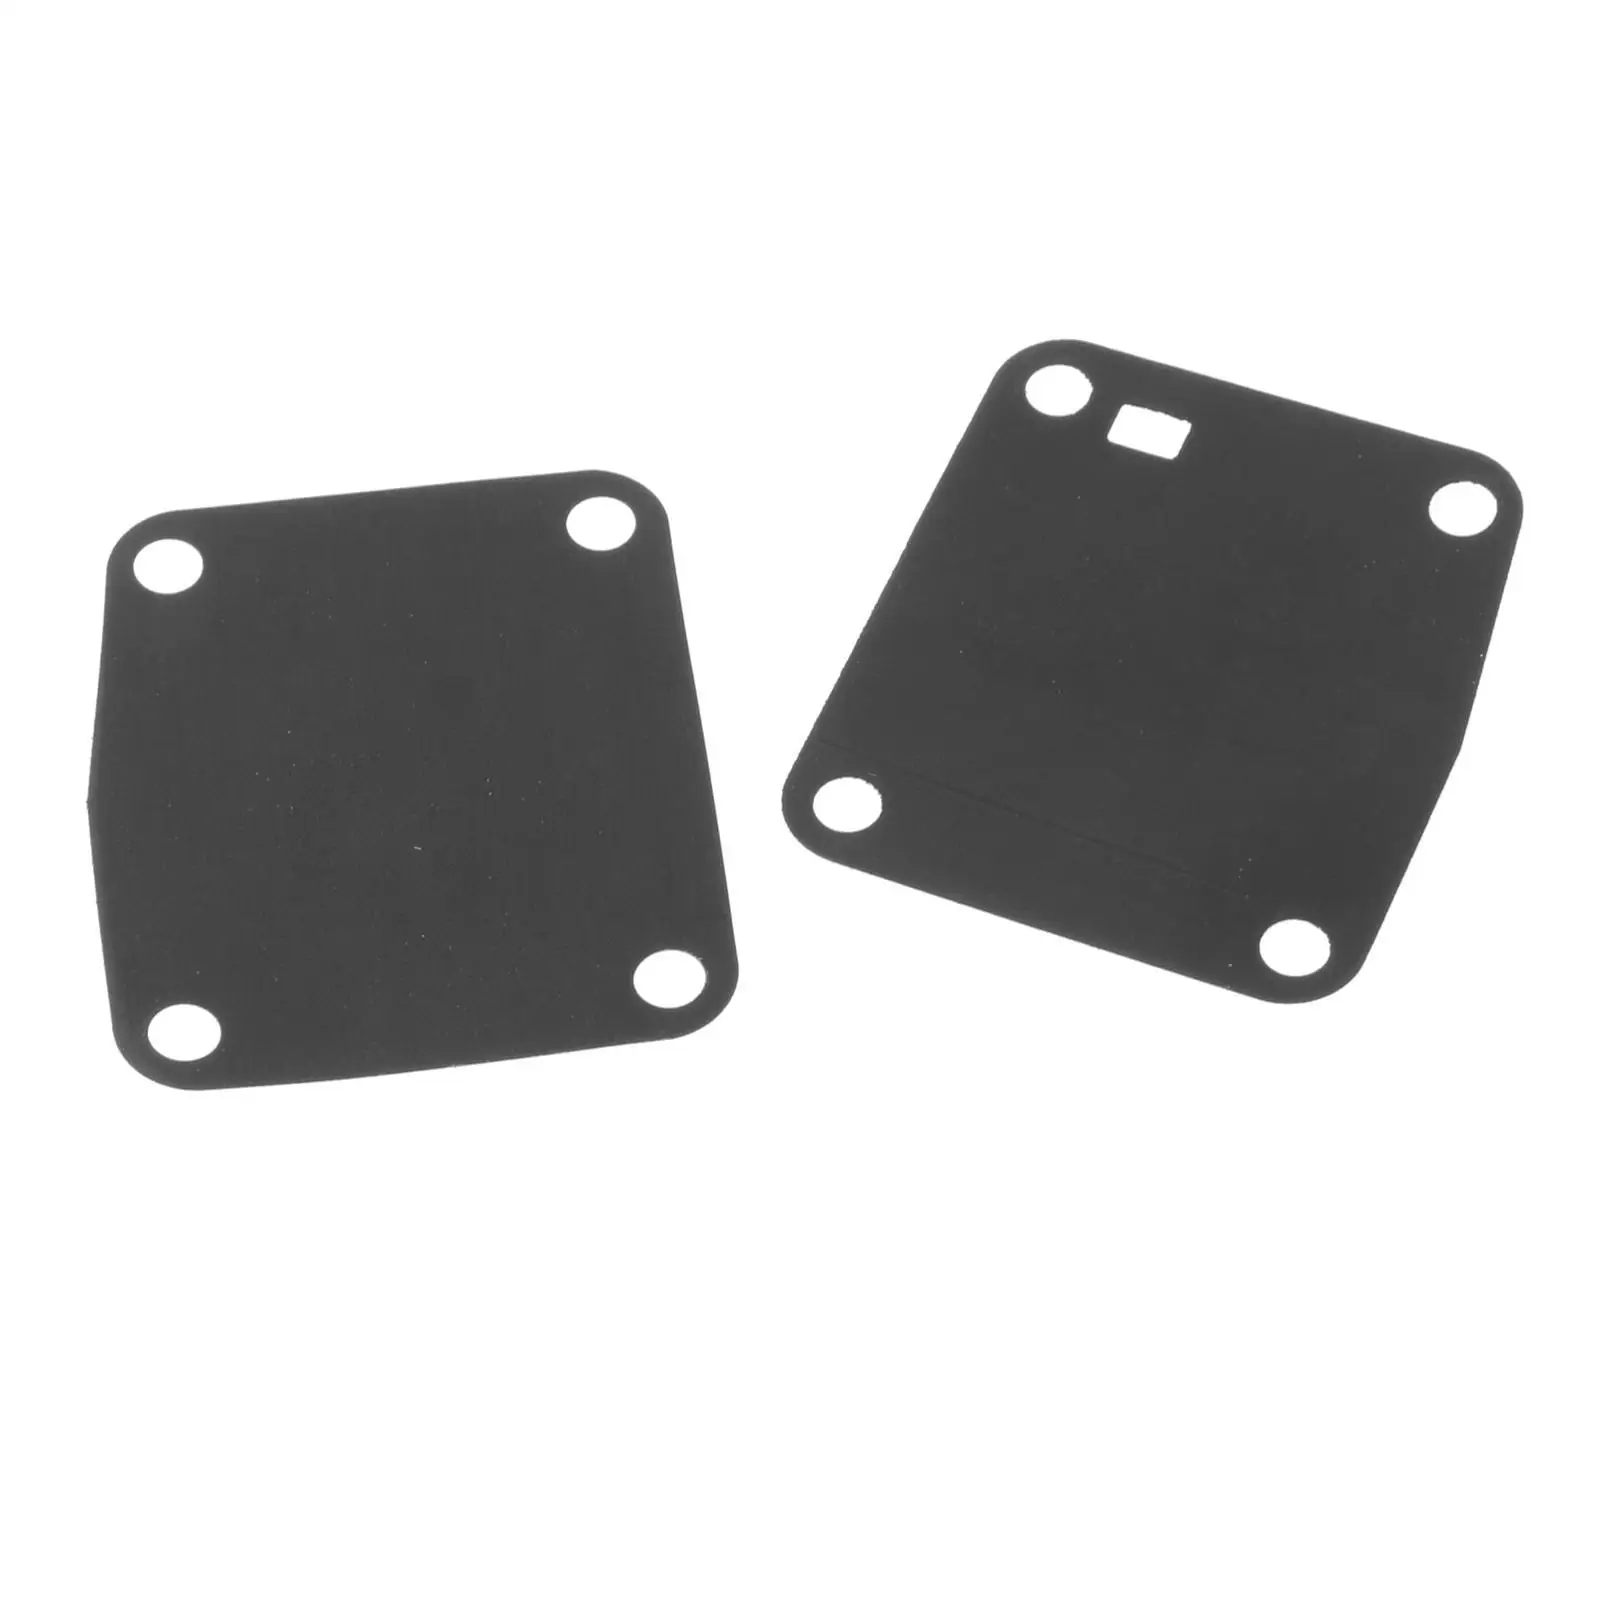 Boat Fuel Diaphragm Set 63V-24411 6411, for 9.15-Stroke, Direct Replaces, Easy to Install Durable